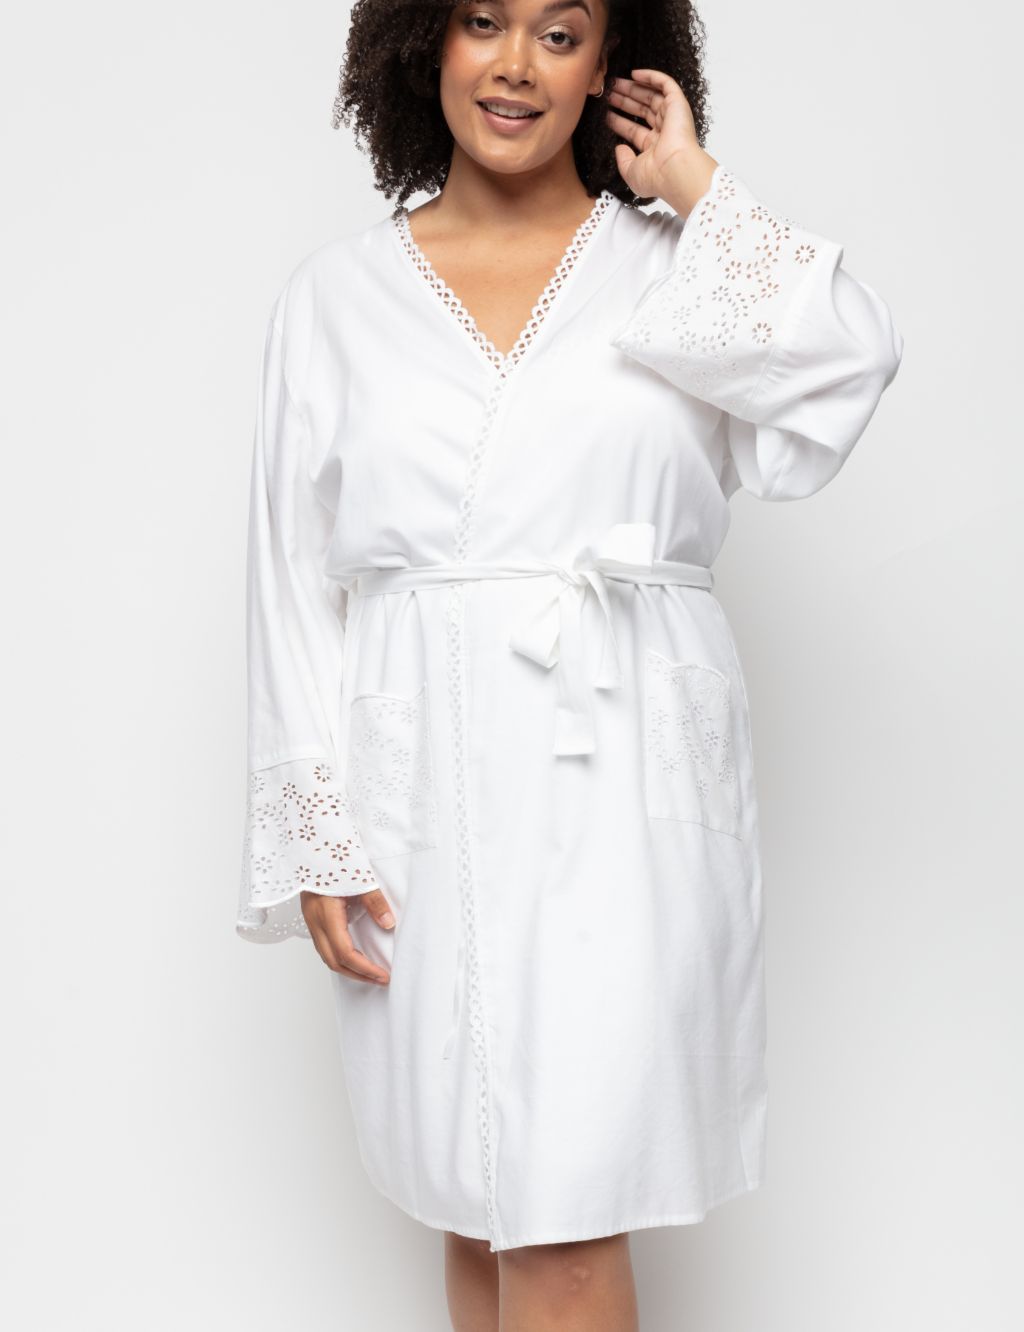 Cotton Modal Broderie Short Dressing Gown image 1